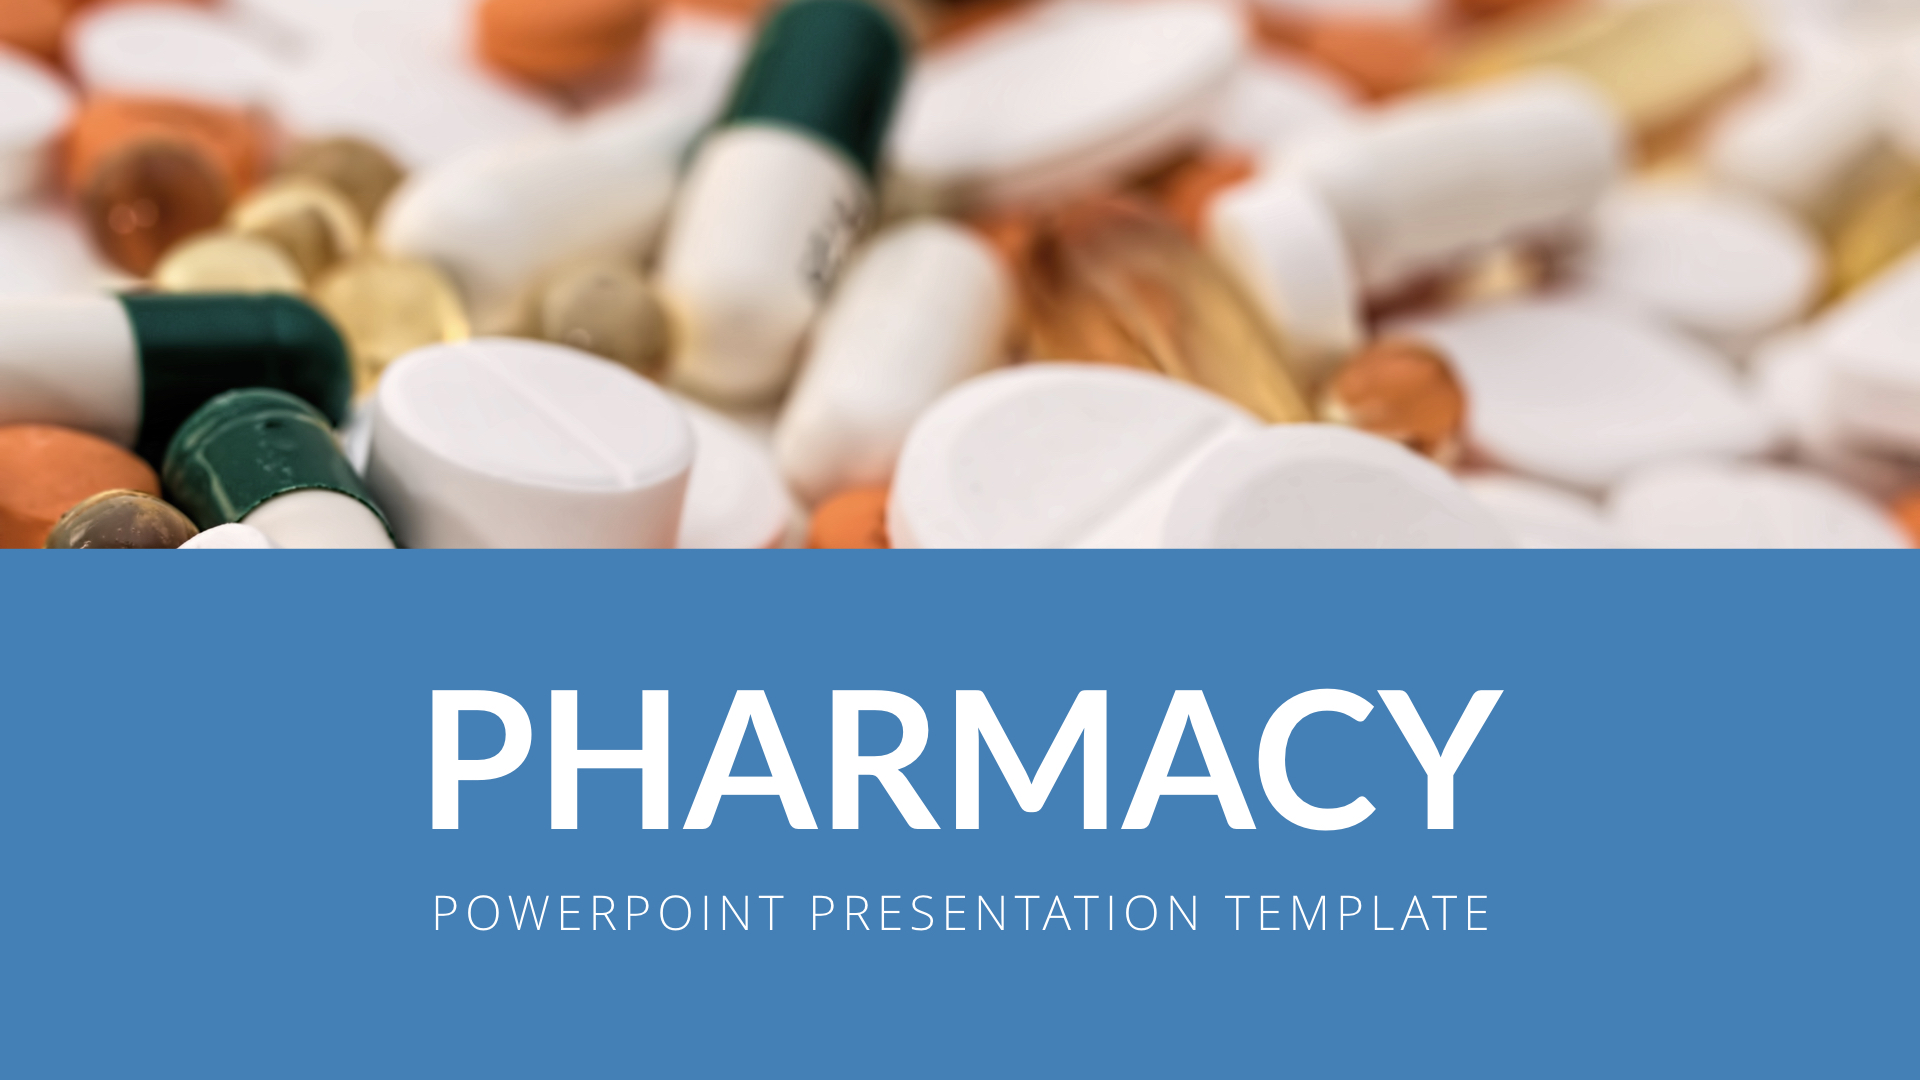 oral presentation topics for pharmacy students